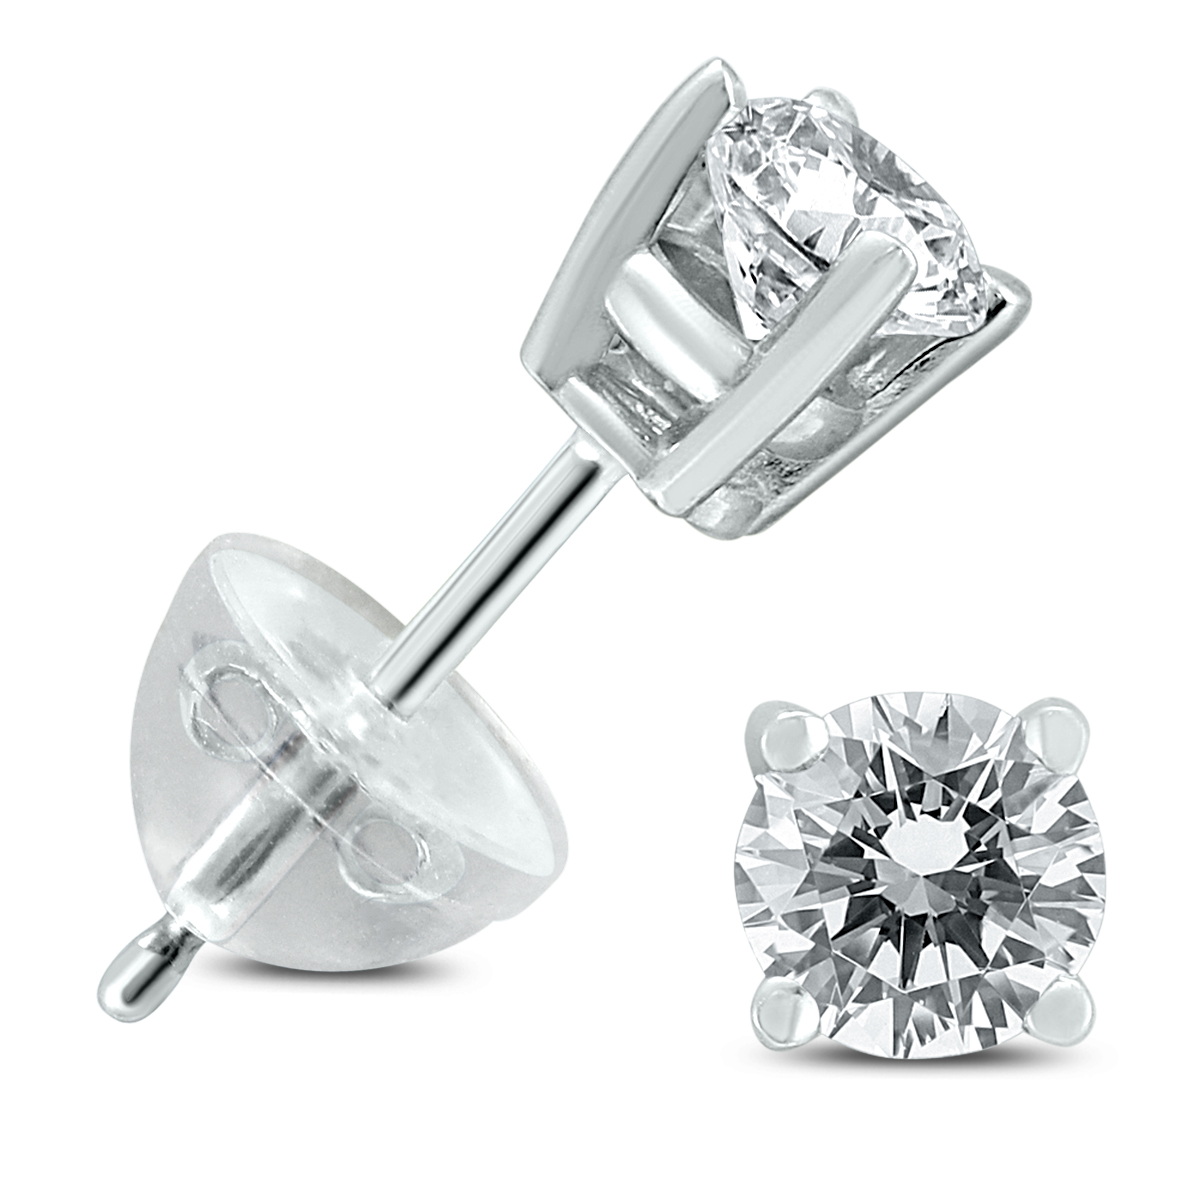 .55CTW Round Diamond Solitaire Stud Earrings In 14k White Gold with Silicon Backs